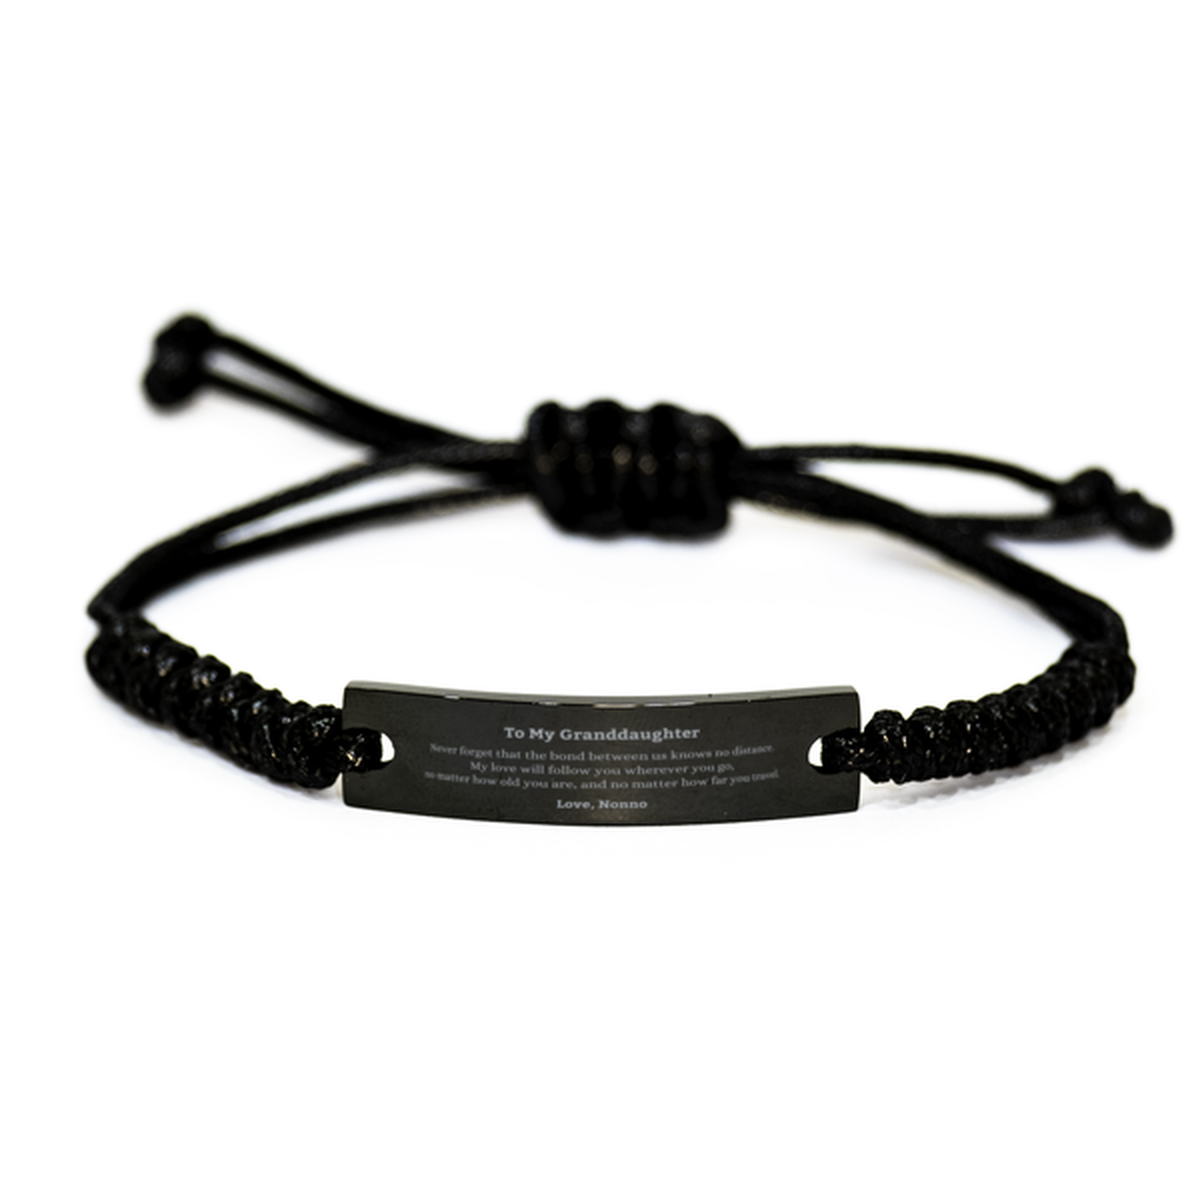 Granddaughter Birthday Gifts from Nonno, Adjustable Black Rope Bracelet for Granddaughter Christmas Graduation Unique Gifts Granddaughter Never forget that the bond between us knows no distance. Love, Nonno